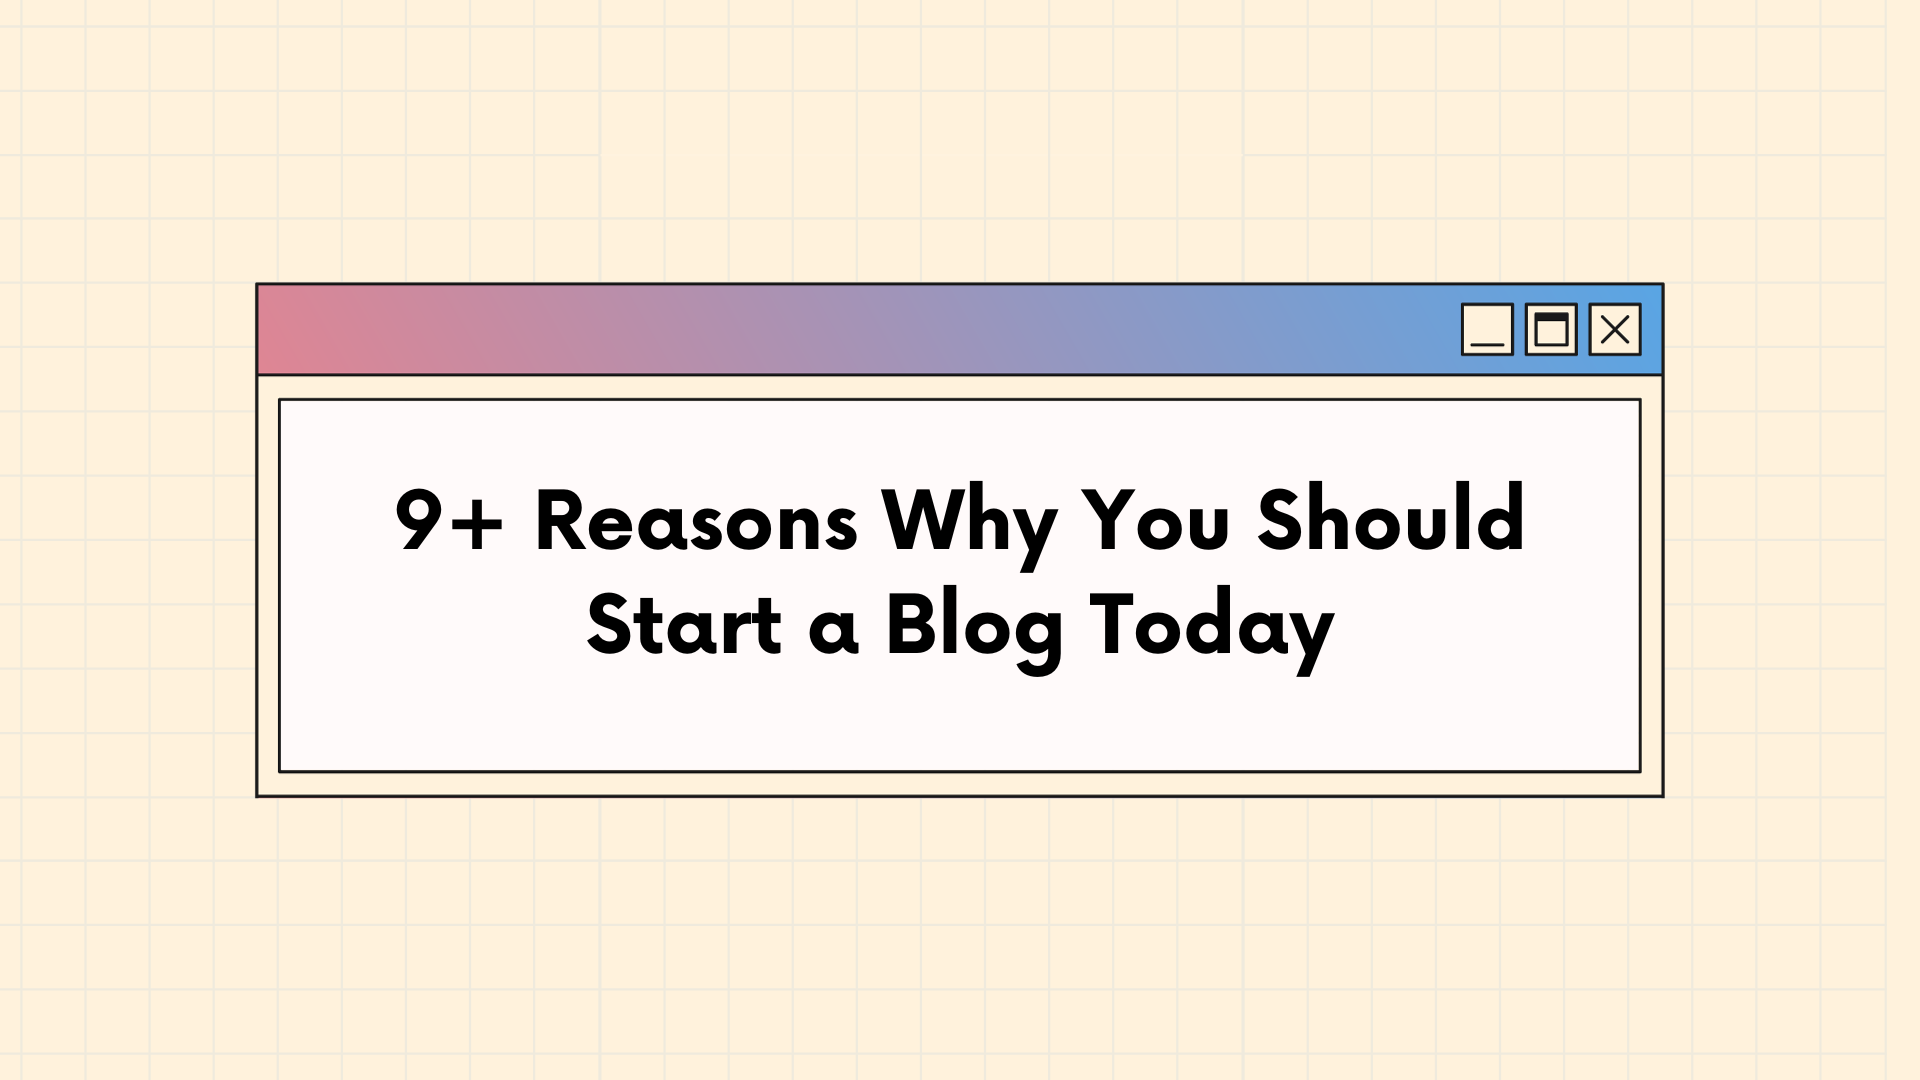 9+ Reasons Why You Should Start a Blog Today